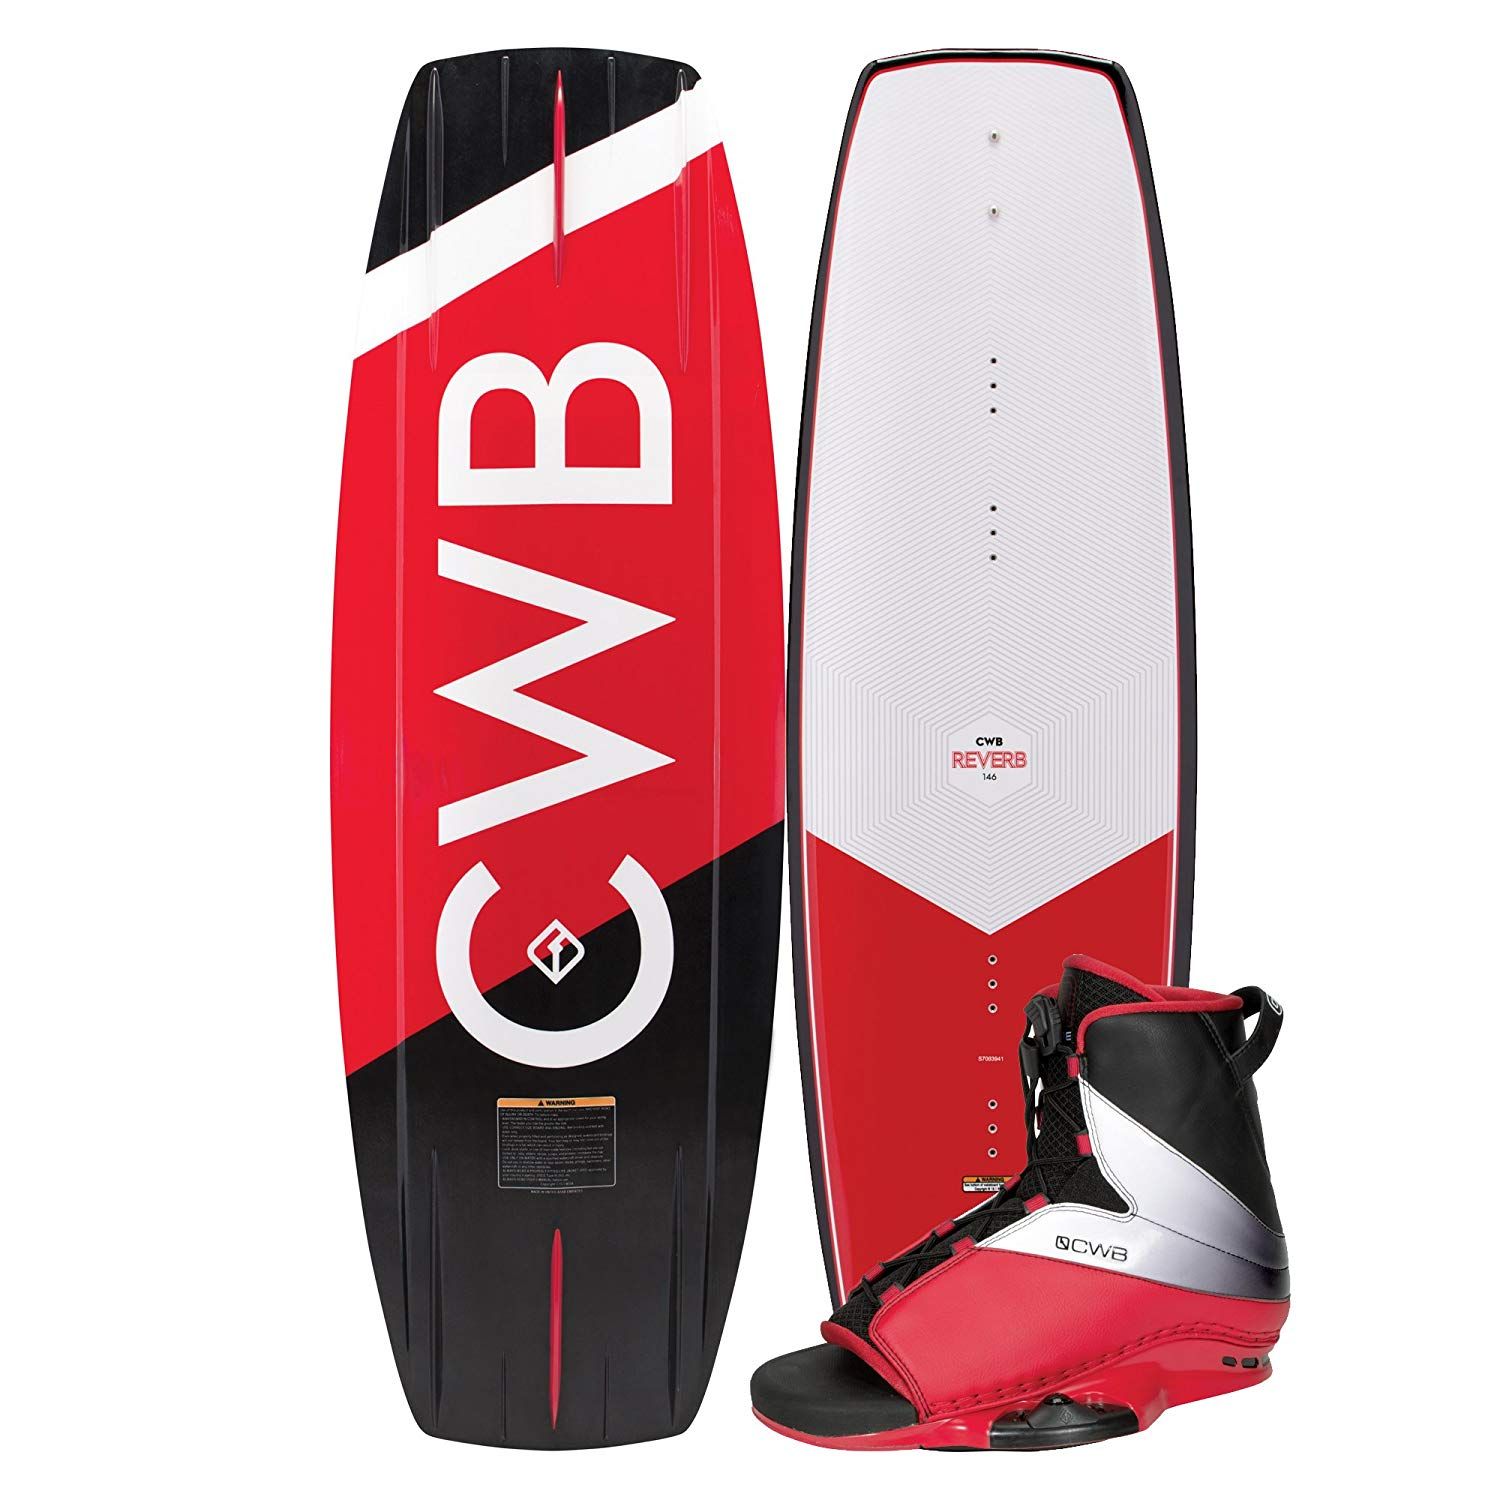 Pack Wakeboard Reverb + Chausses Empire 2017